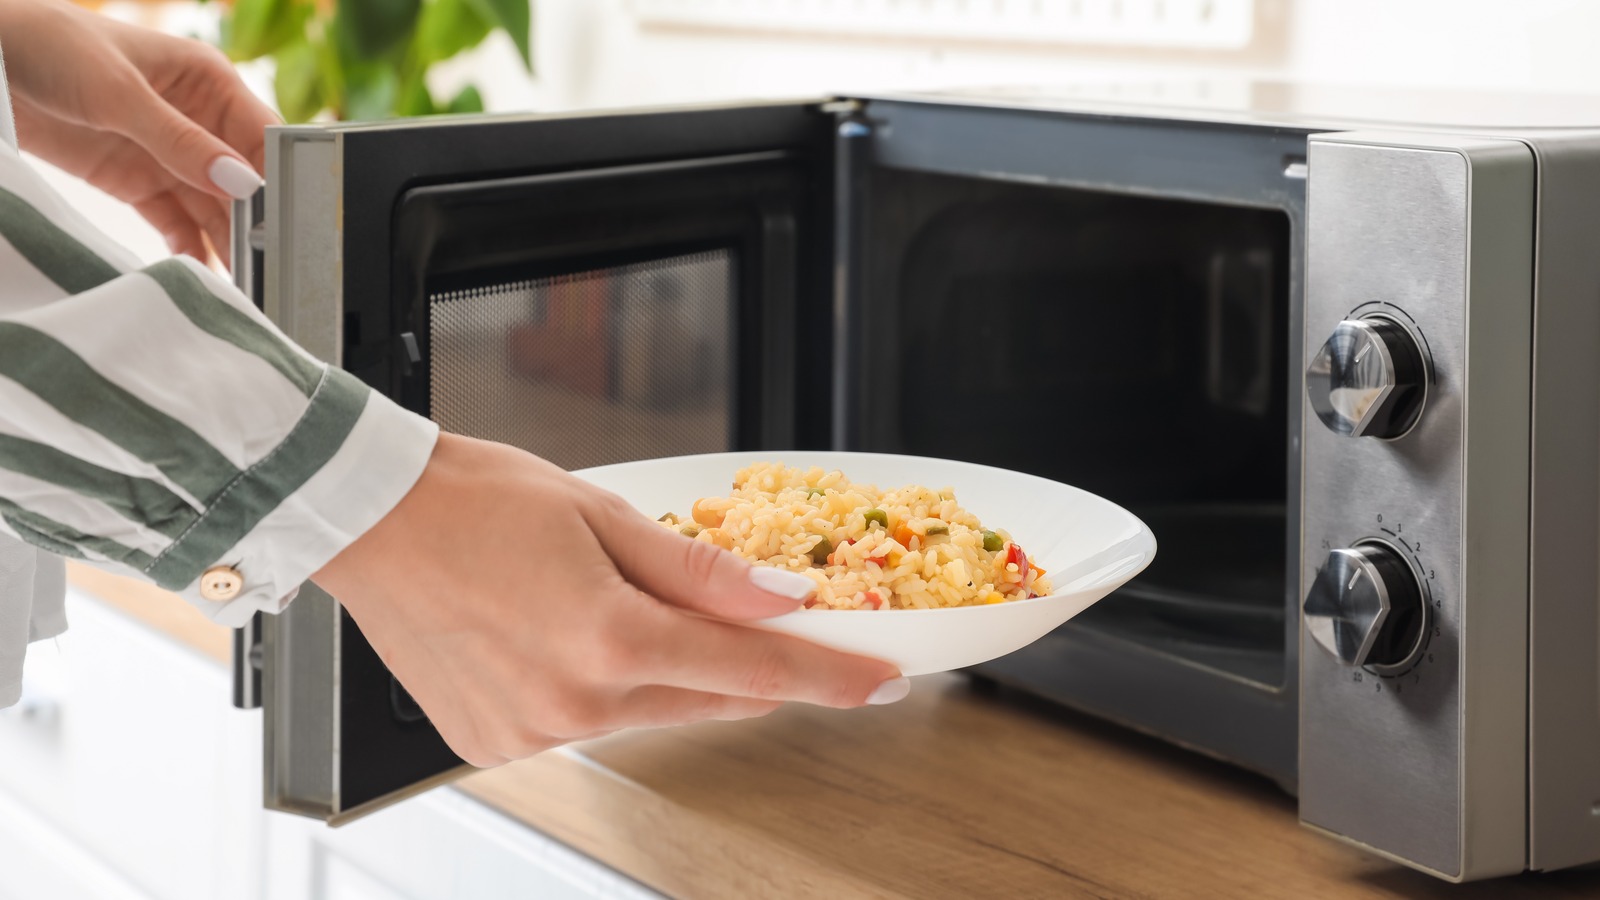 Microwave cooking and nutrition - Harvard Health